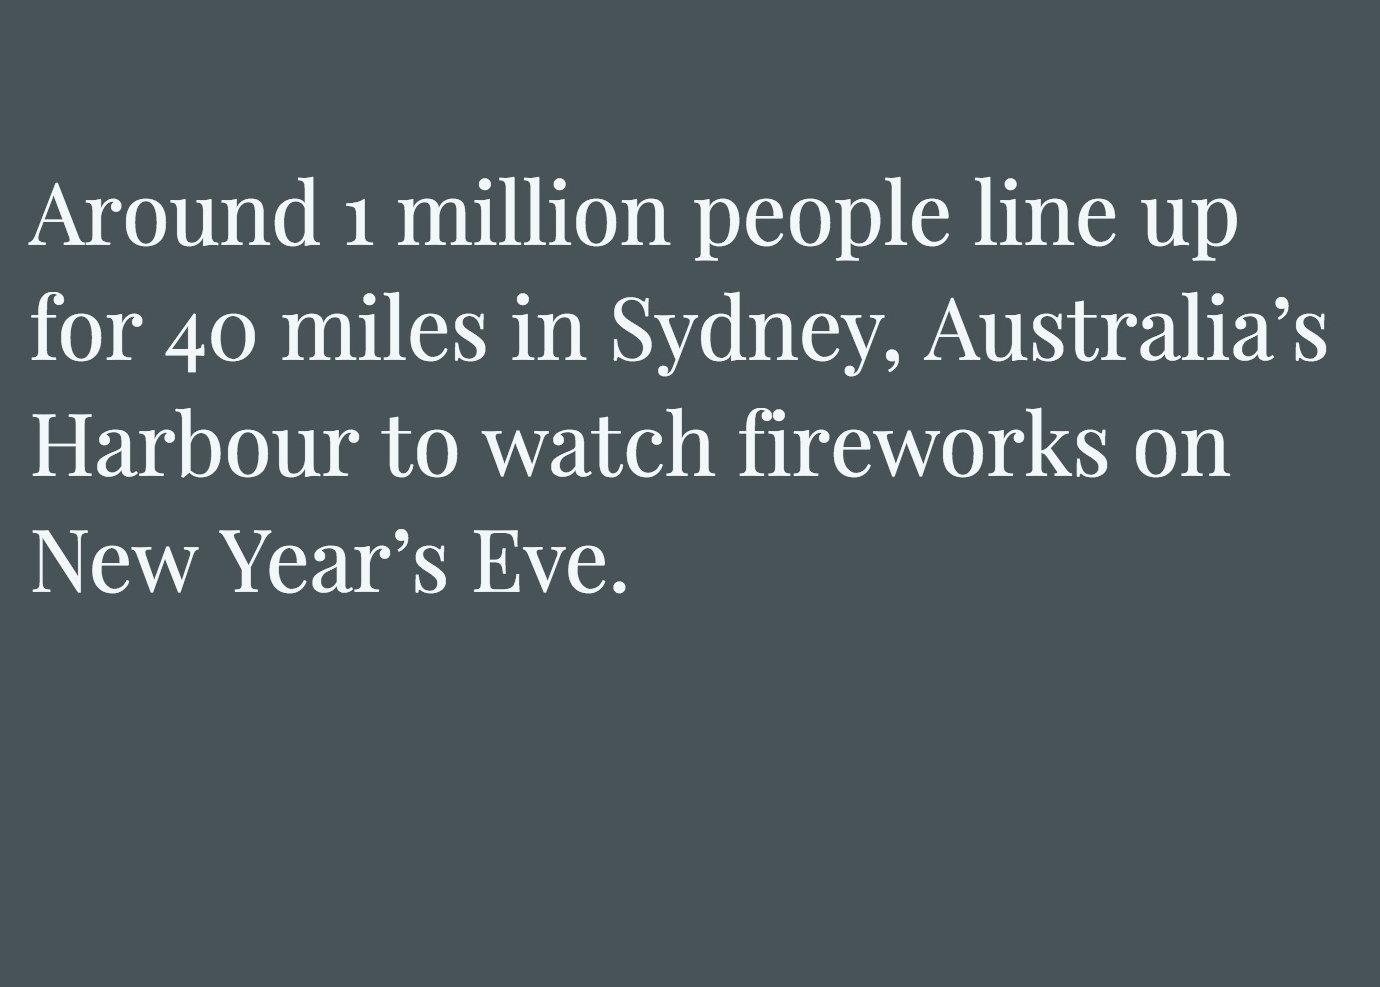 Weird new years facts